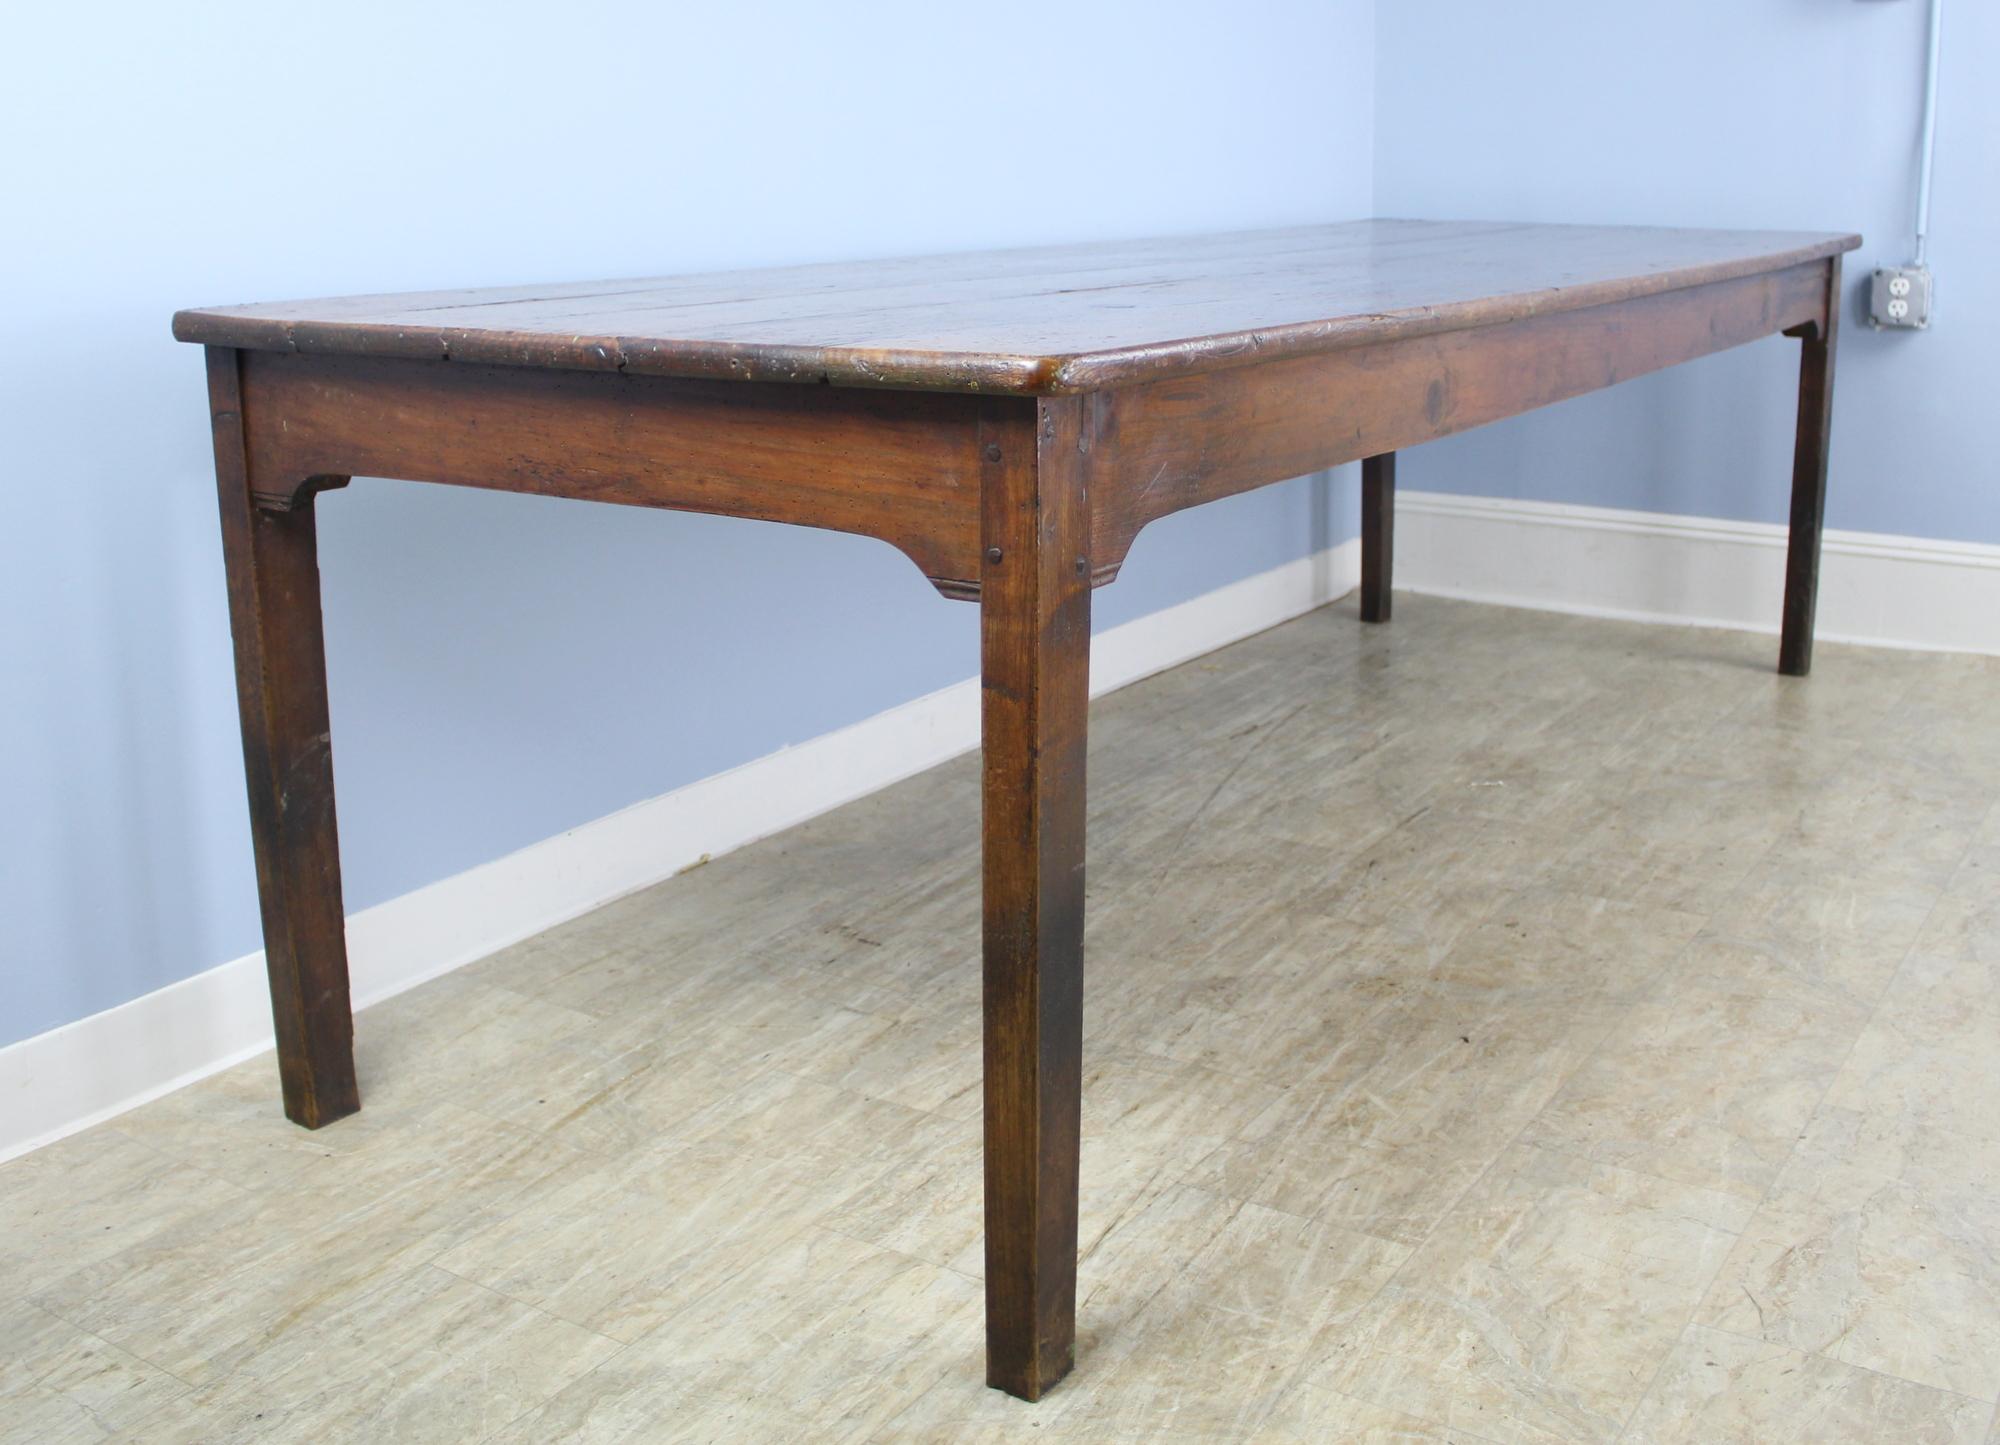 A long rustic pine farm table with glorious pine grain and natural knot holes. The color and patina on this piece are really good. With 97.5 inches between the legs on the long side, this table can seat ten comfortably. The apron height of 24.75